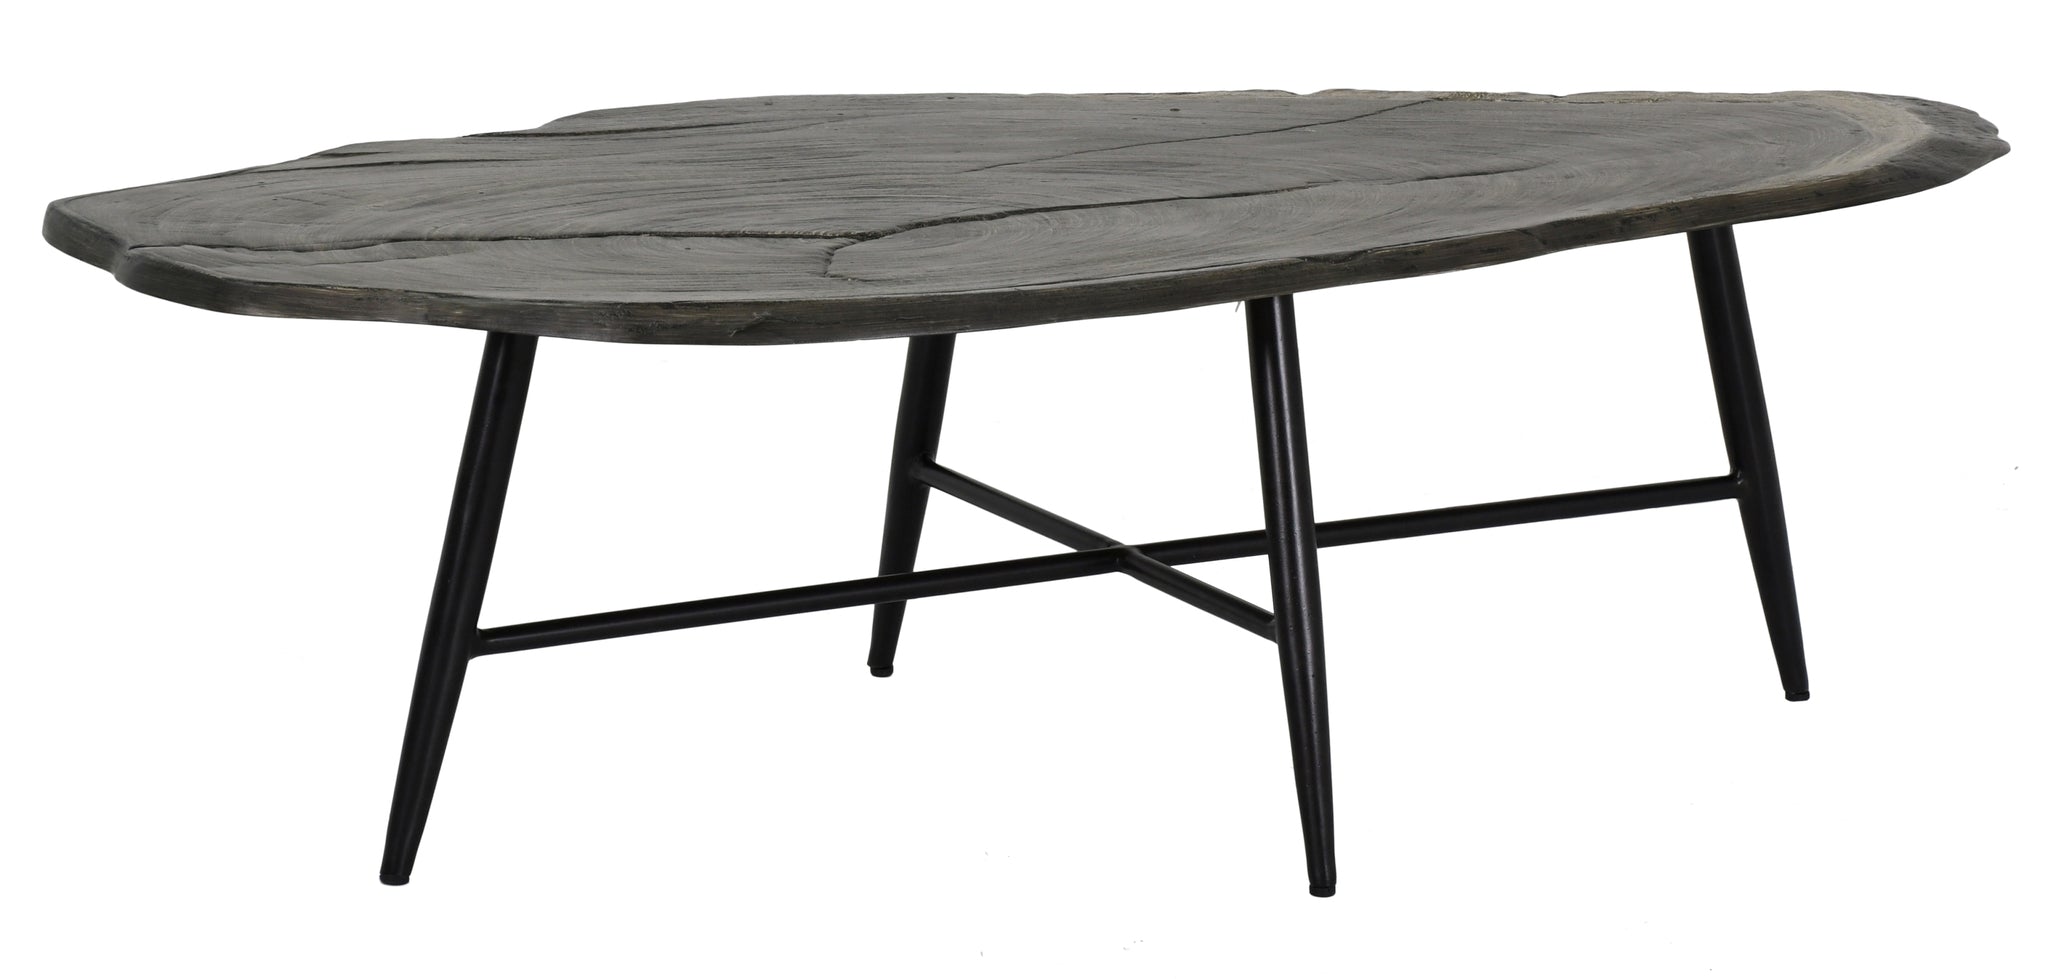 Castelle Nature's Wood Natural Coffee Table with Weathered Wood Top and Antique Dark Rum Finish on legs 12038586